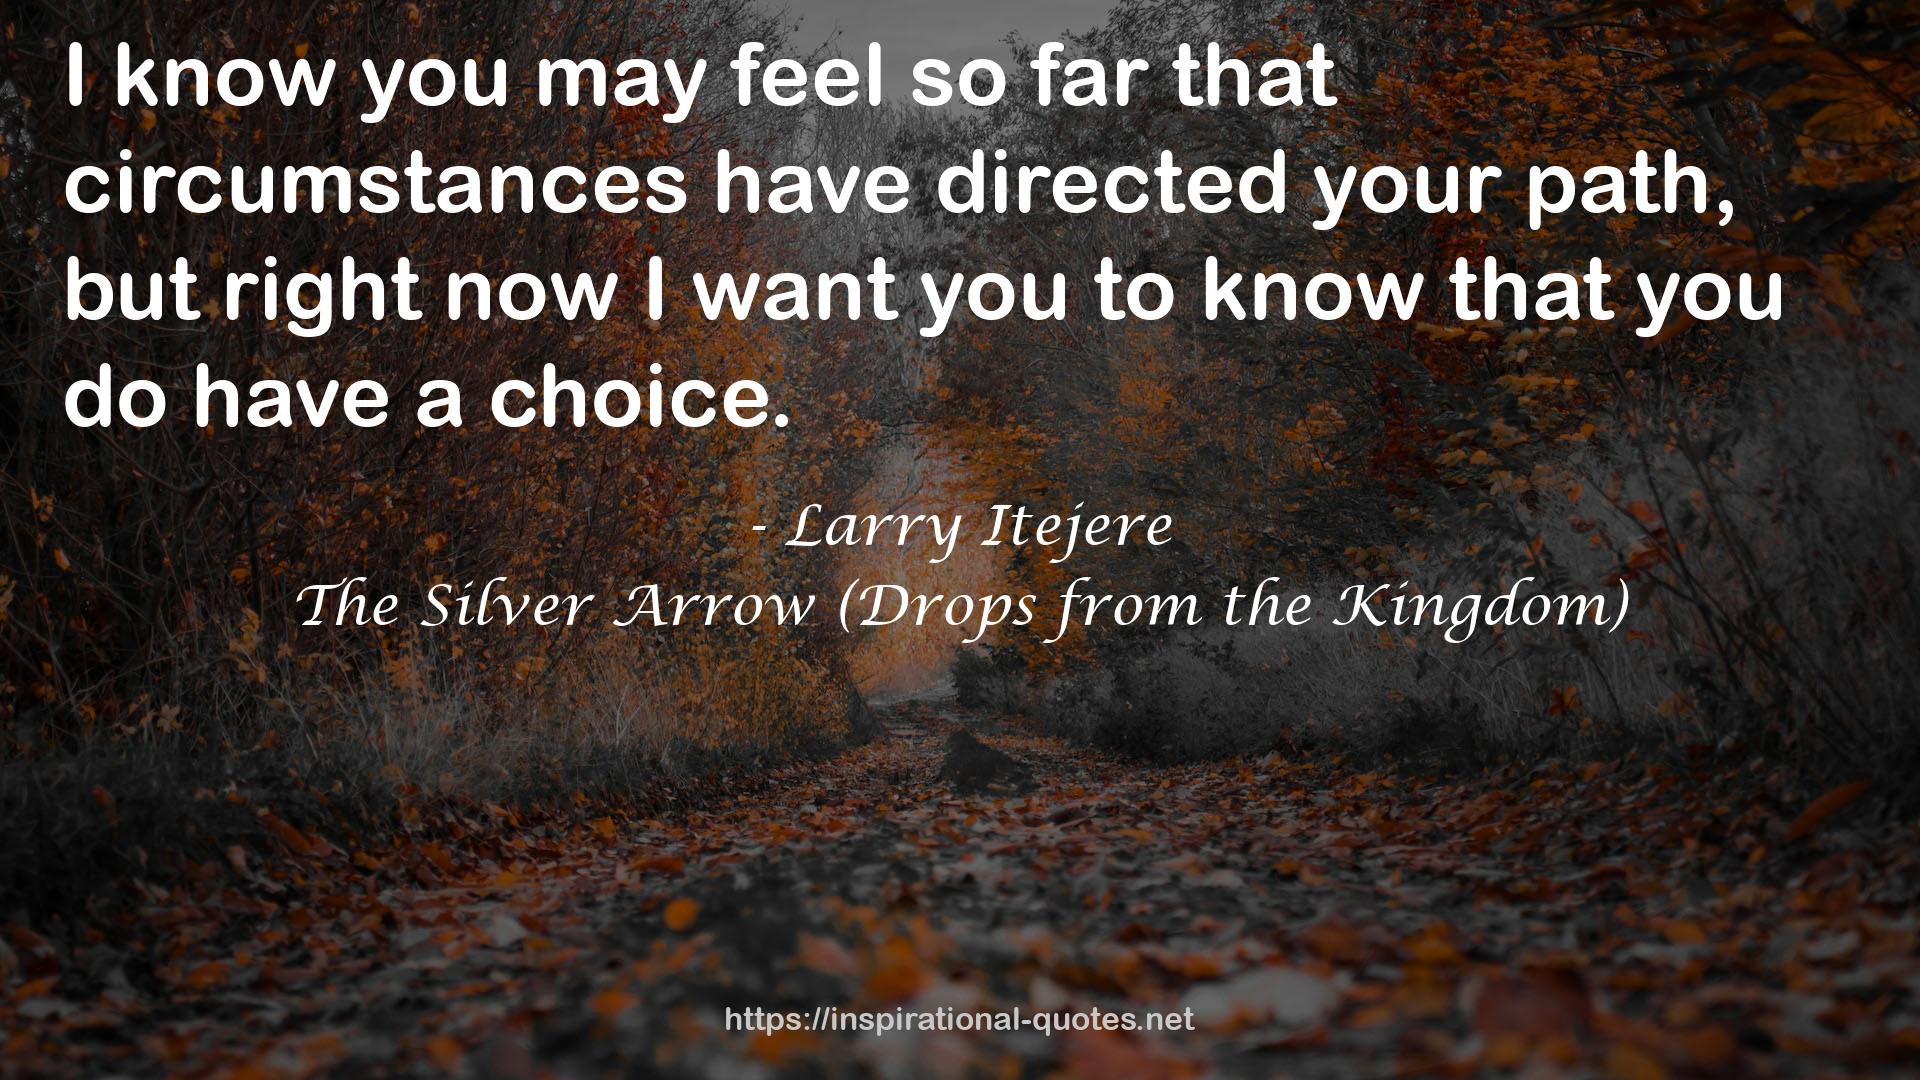 The Silver Arrow (Drops from the Kingdom) QUOTES